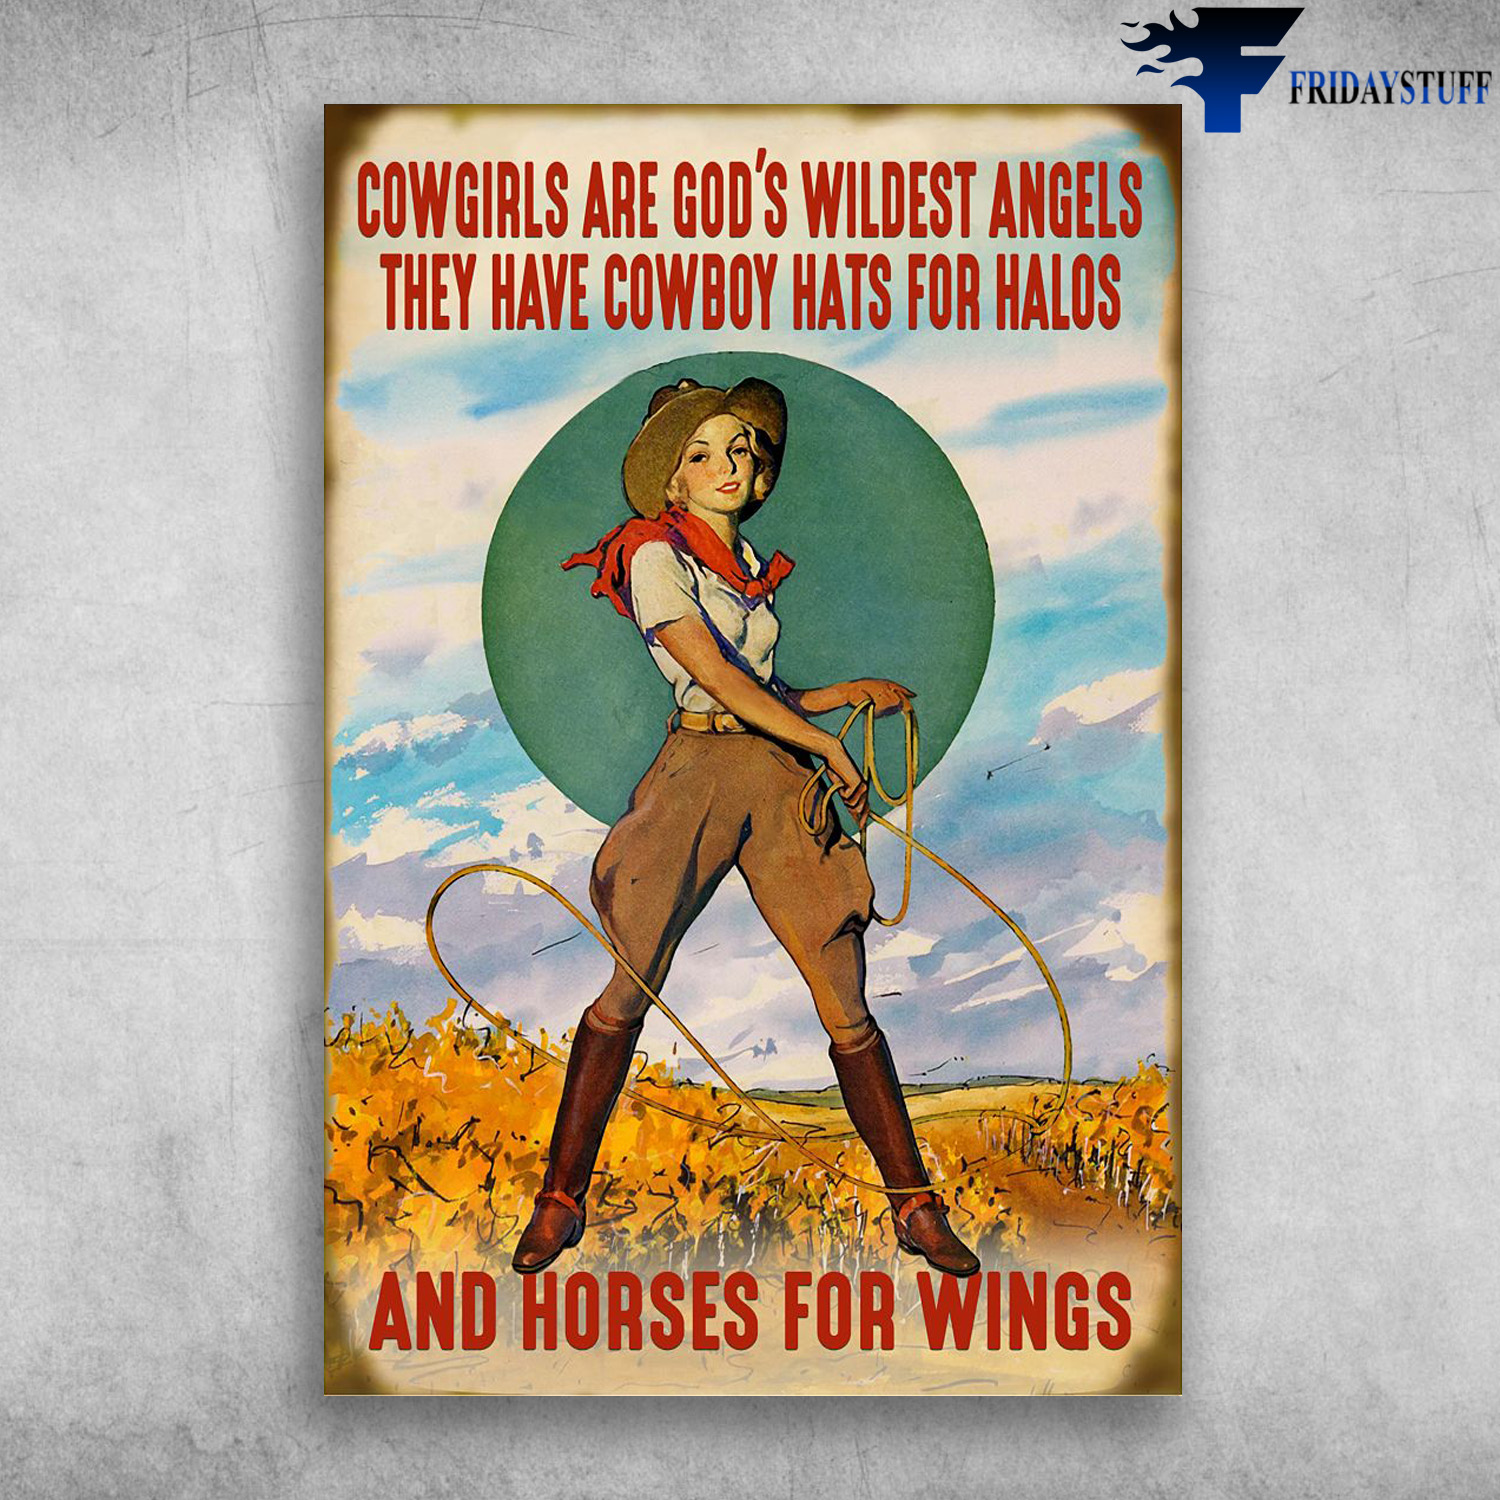 The Cowgirl - Cowgirls Are God's Wildest Angels, They Have Cowboy Hats For Halos, And Horses For Wings